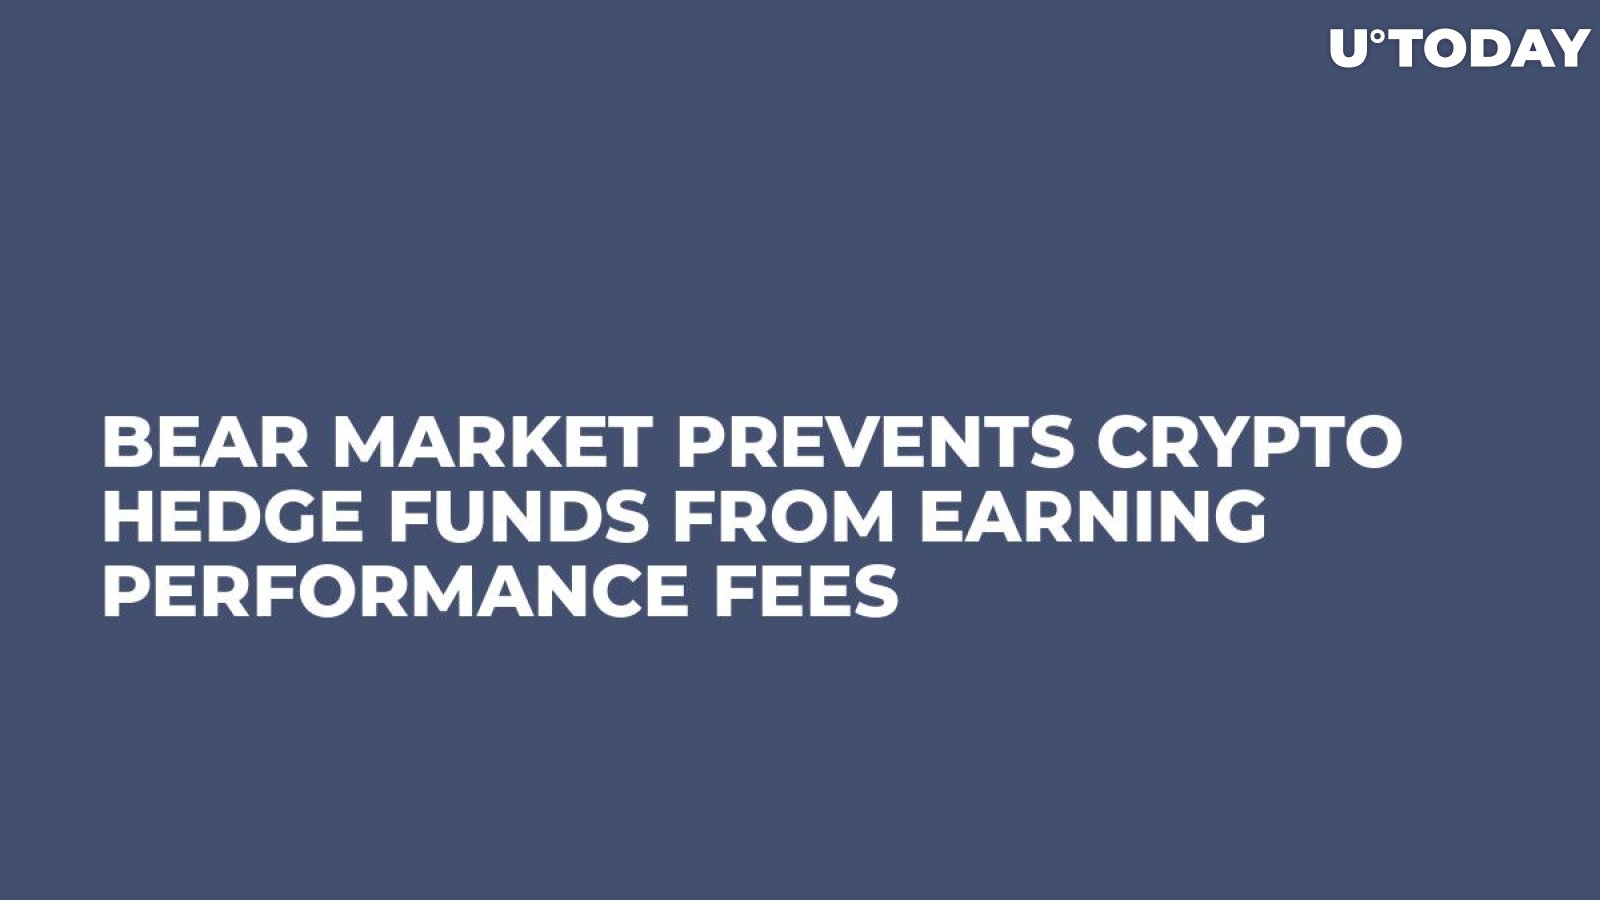 Bear Market Prevents Crypto Hedge Funds From Earning Performance Fees